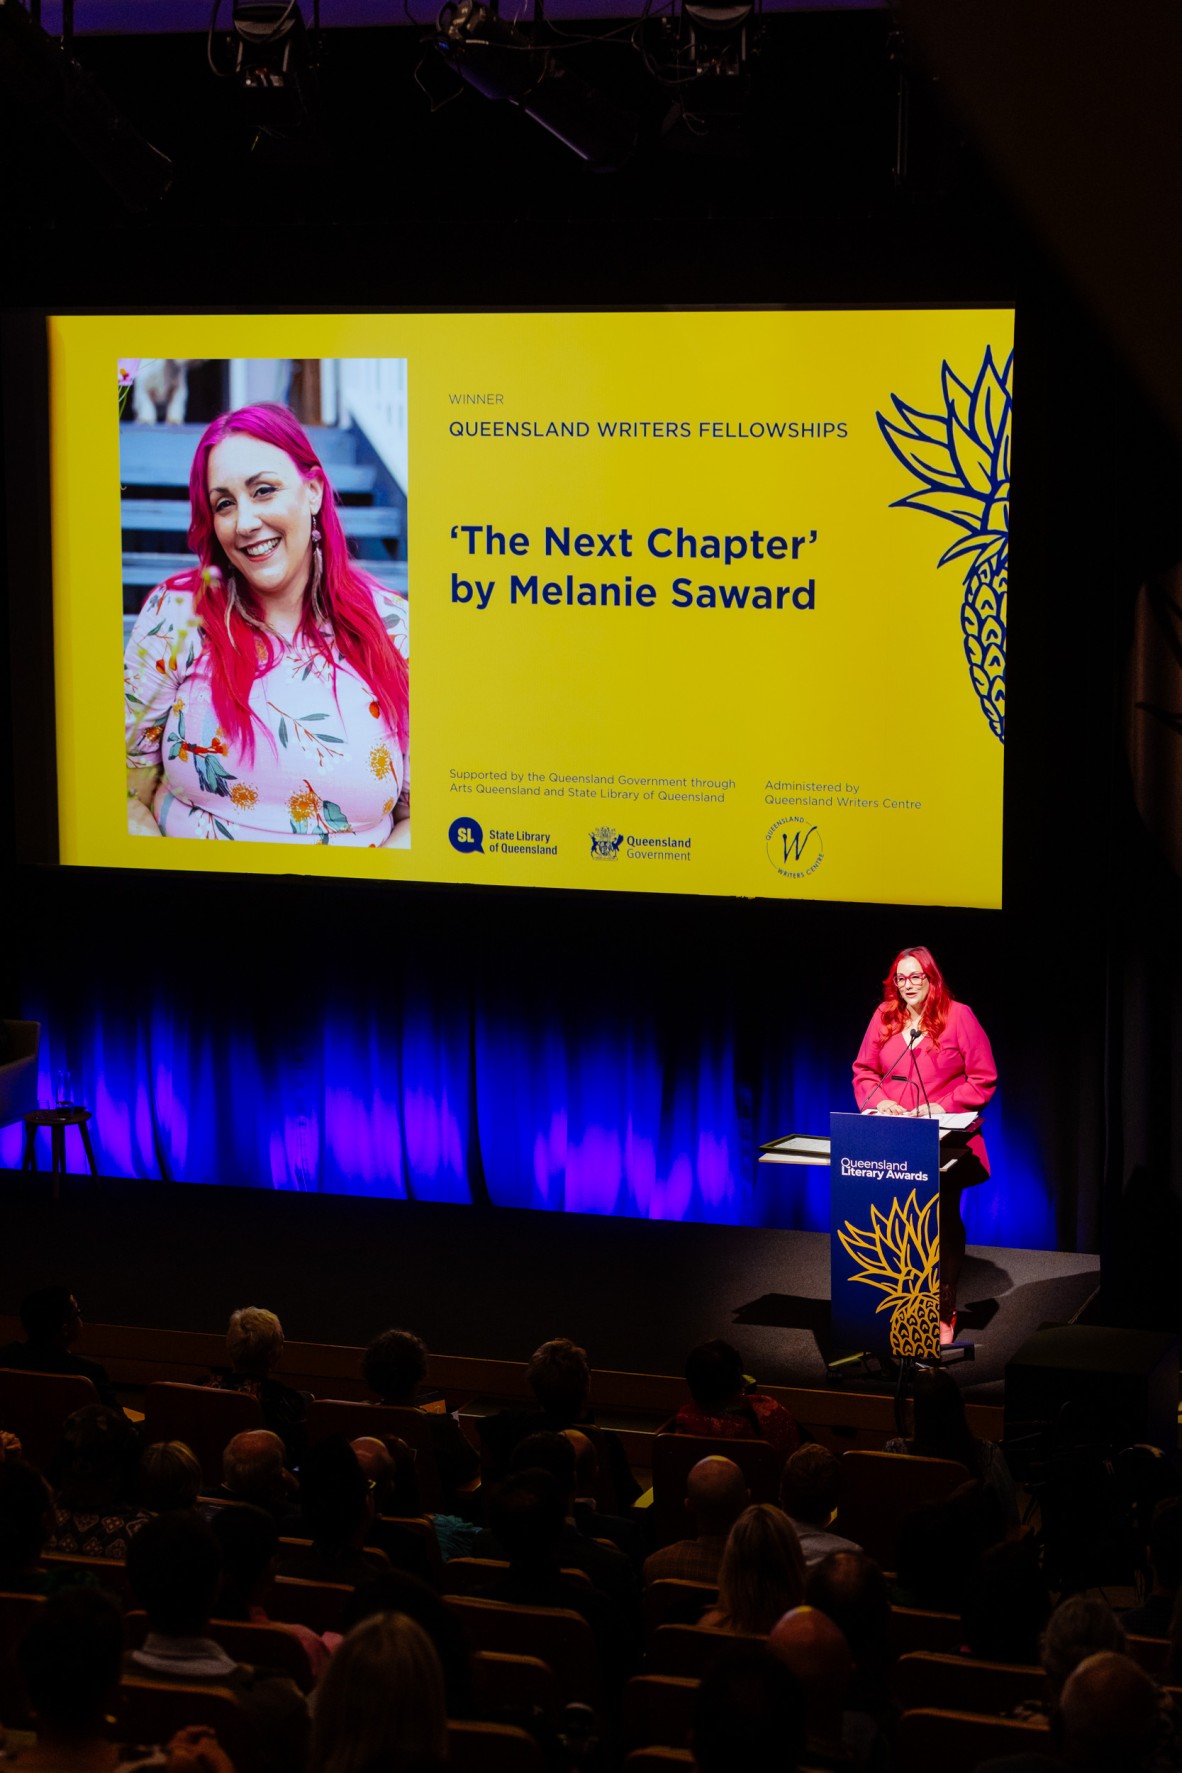 A view of a stage with a woman in pink at the lectern and a yellow slide on the screen saying 'The Next Chapter' by Melanie Saward